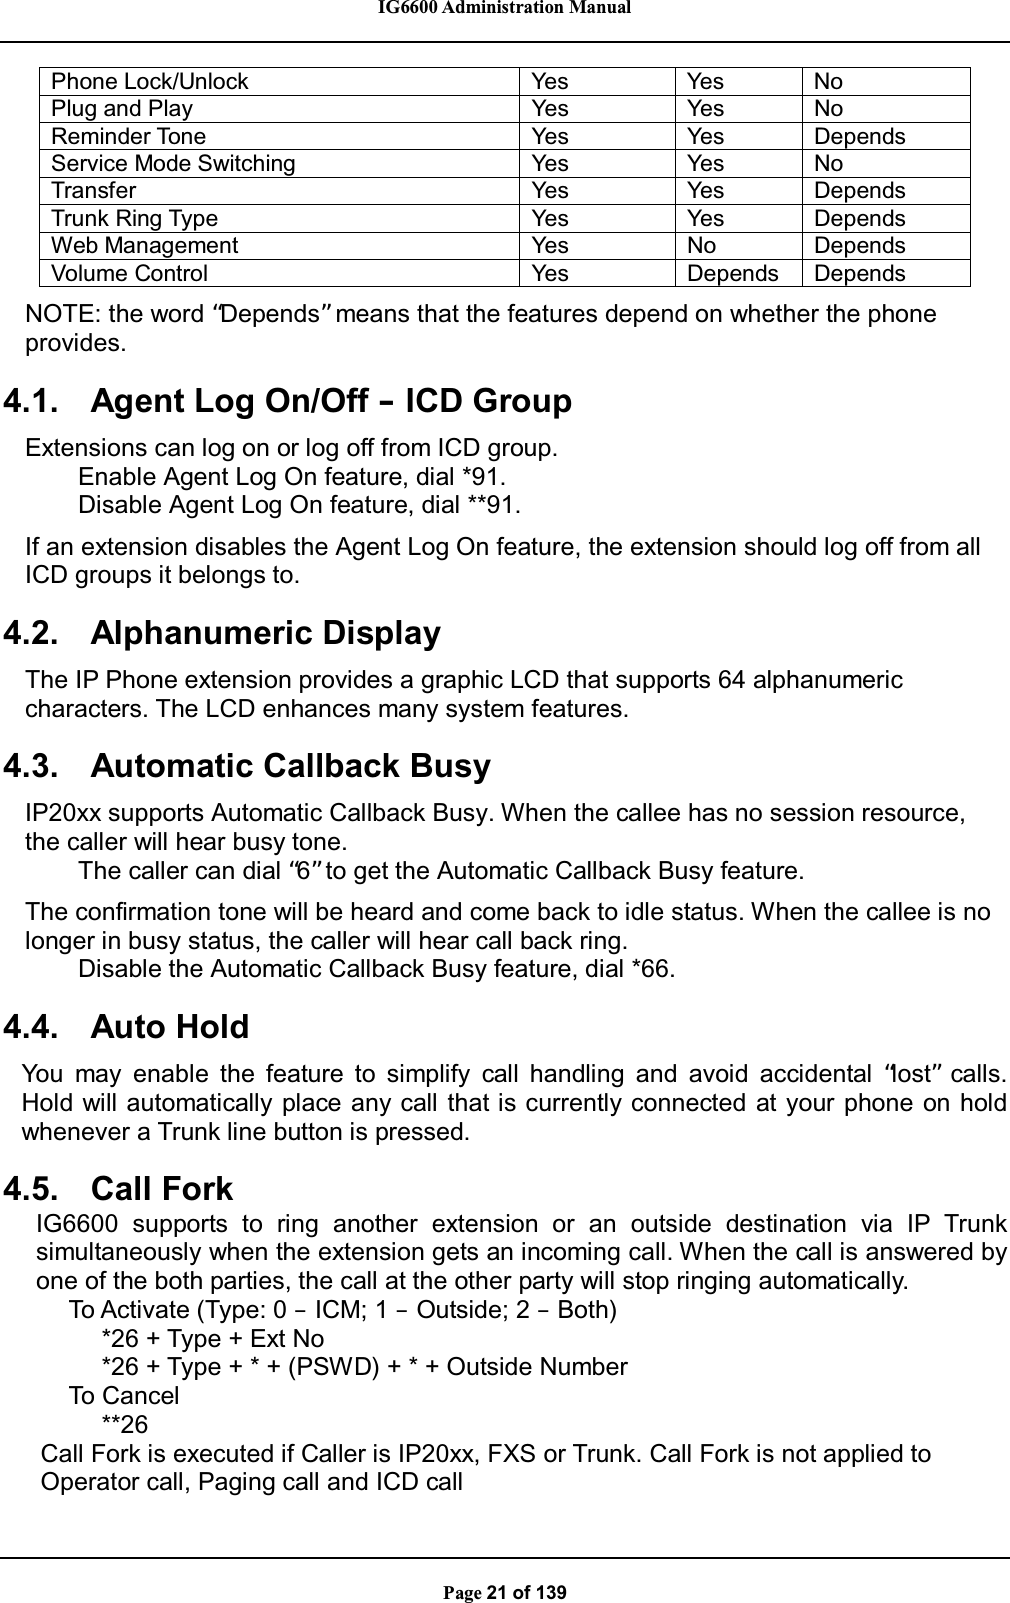 IG6600 Administration ManualPage 21 of 139Phone Lock/Unlock Yes Yes NoPlug and Play Yes Yes NoReminder Tone Yes Yes DependsService Mode Switching Yes Yes NoTransfer Yes Yes DependsTrunk Ring Type Yes Yes DependsWeb Management Yes No DependsVolume Control Yes Depends DependsNOTE: the word “Depends”means that the features depend on whether the phoneprovides.4.1. Agent Log On/Off –ICD GroupExtensions can log on or log off from ICD group.Enable Agent Log On feature, dial *91.Disable Agent Log On feature, dial **91.If an extension disables the Agent Log On feature, the extension should log off from allICD groups it belongs to.4.2. Alphanumeric DisplayThe IP Phone extension provides a graphic LCD that supports 64 alphanumericcharacters. The LCD enhances many system features.4.3. Automatic Callback BusyIP20xx supports Automatic Callback Busy. When the callee has no session resource,the caller will hear busy tone.The caller can dial “6”to get the Automatic Callback Busy feature.The confirmation tone will be heard and come back to idle status. When the callee is nolonger in busy status, the caller will hear call back ring.Disable the Automatic Callback Busy feature, dial *66.4.4. Auto HoldYou may enable the feature to simplify call handling and avoid accidental “lost”calls.Hold will automatically place any call that is currently connected at your phone on holdwhenever a Trunk line button is pressed.4.5. Call ForkIG6600 supports to ring another extension or an outside destination via IP Trunksimultaneously when the extension gets an incoming call. When the call is answered byone of the both parties, the call at the other party will stop ringing automatically.To Activate (Type: 0 – ICM; 1 –Outside; 2 –Both)*26 + Type + Ext No*26 + Type + * + (PSWD) + * + Outside NumberTo Cancel**26Call Fork is executed if Caller is IP20xx, FXS or Trunk. Call Fork is not applied toOperator call, Paging call and ICD call